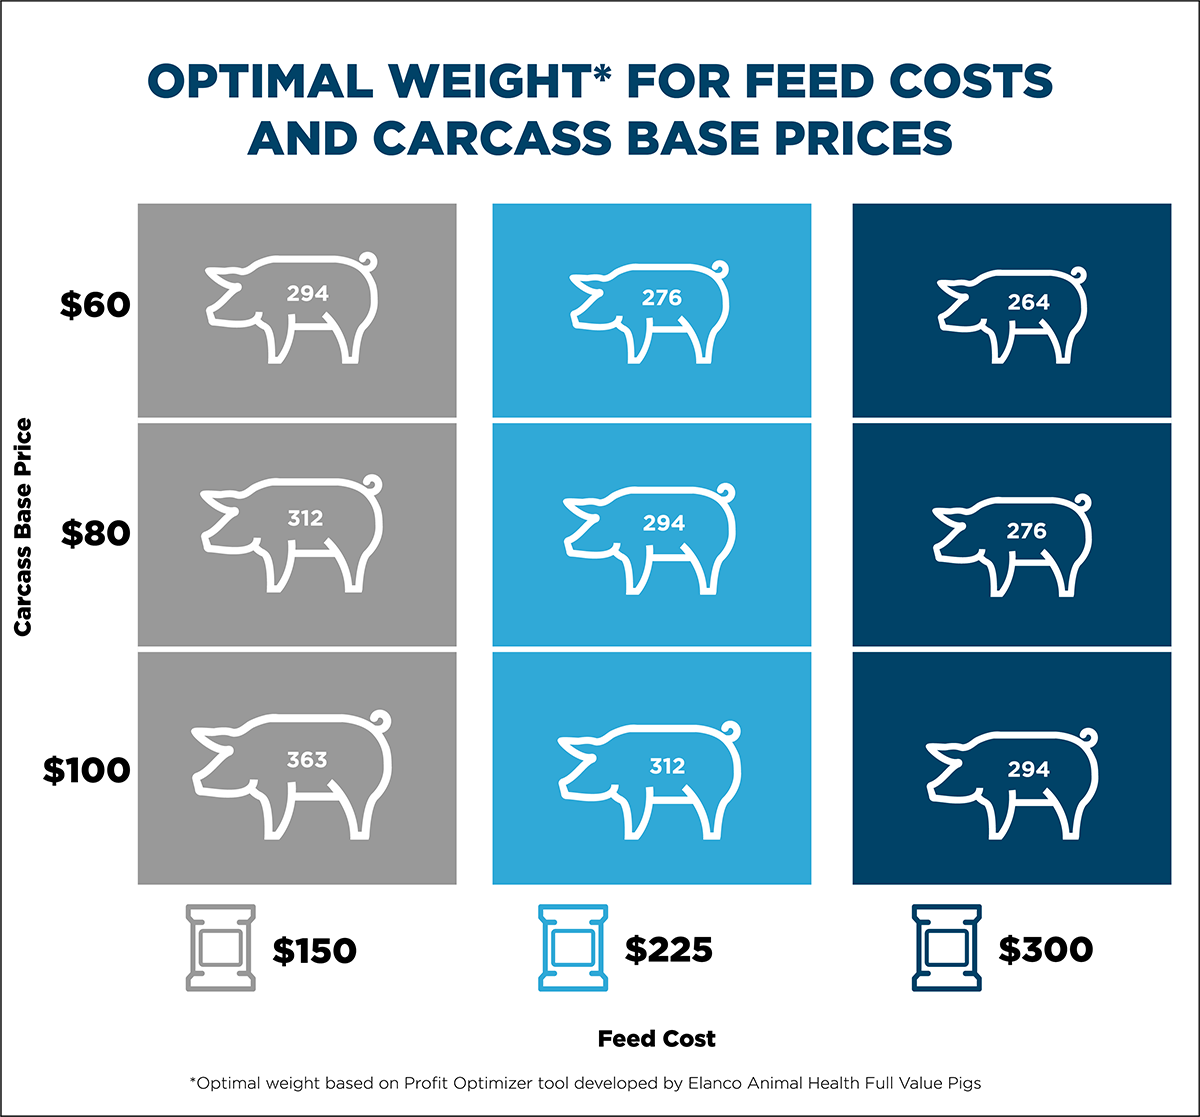 Optimal weight* for feed costs and carcass base prices